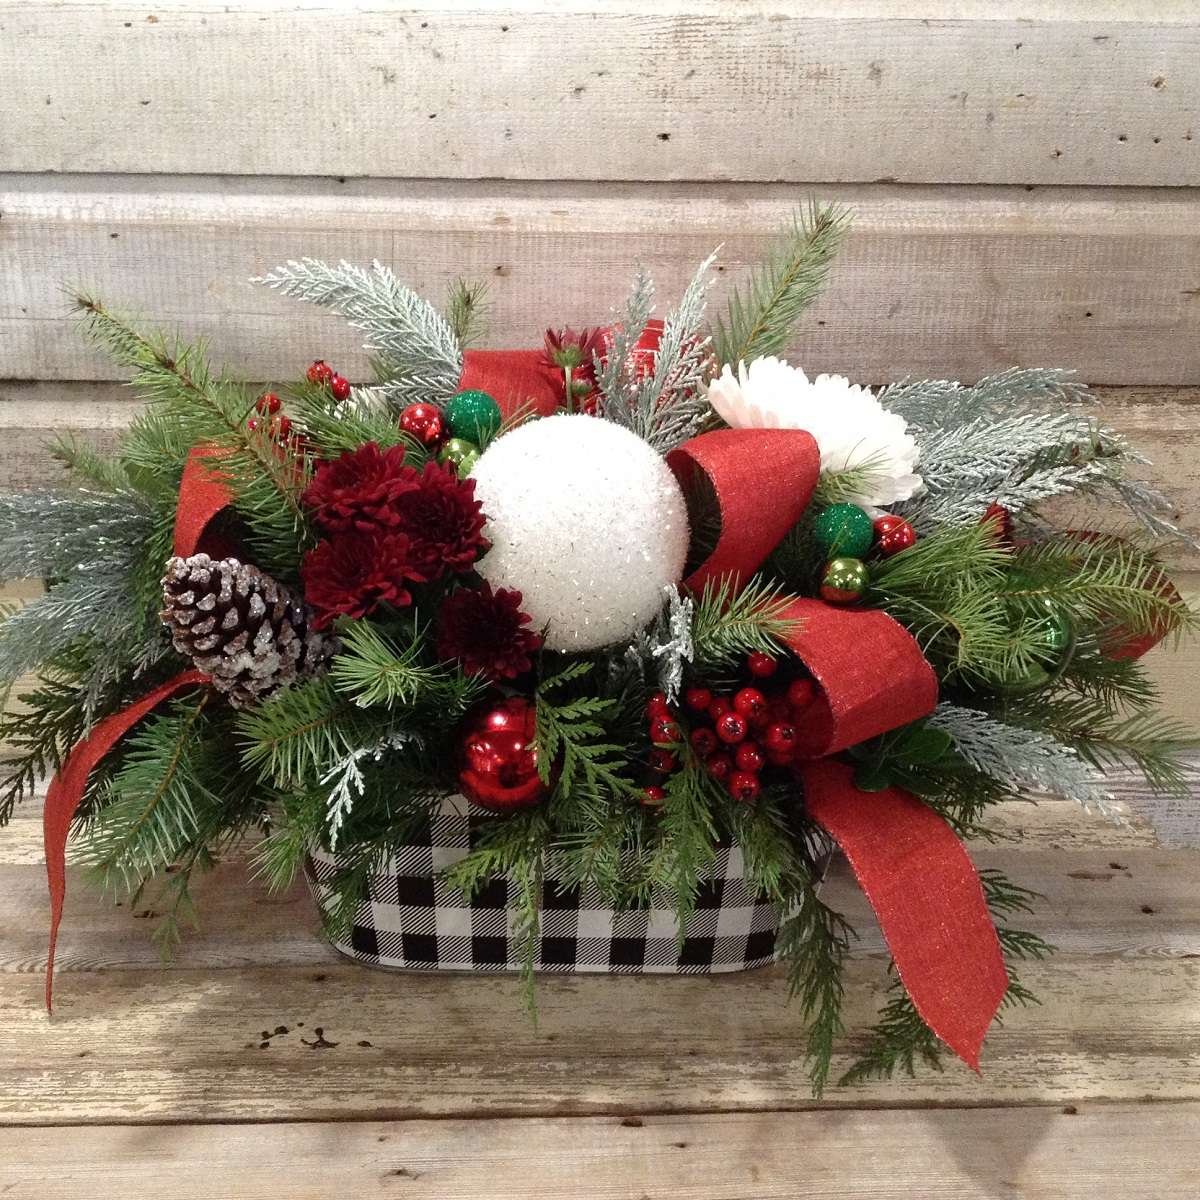 Christmas Floral arrangment with winter greens red and white flowers with a buffalo plaid tin container